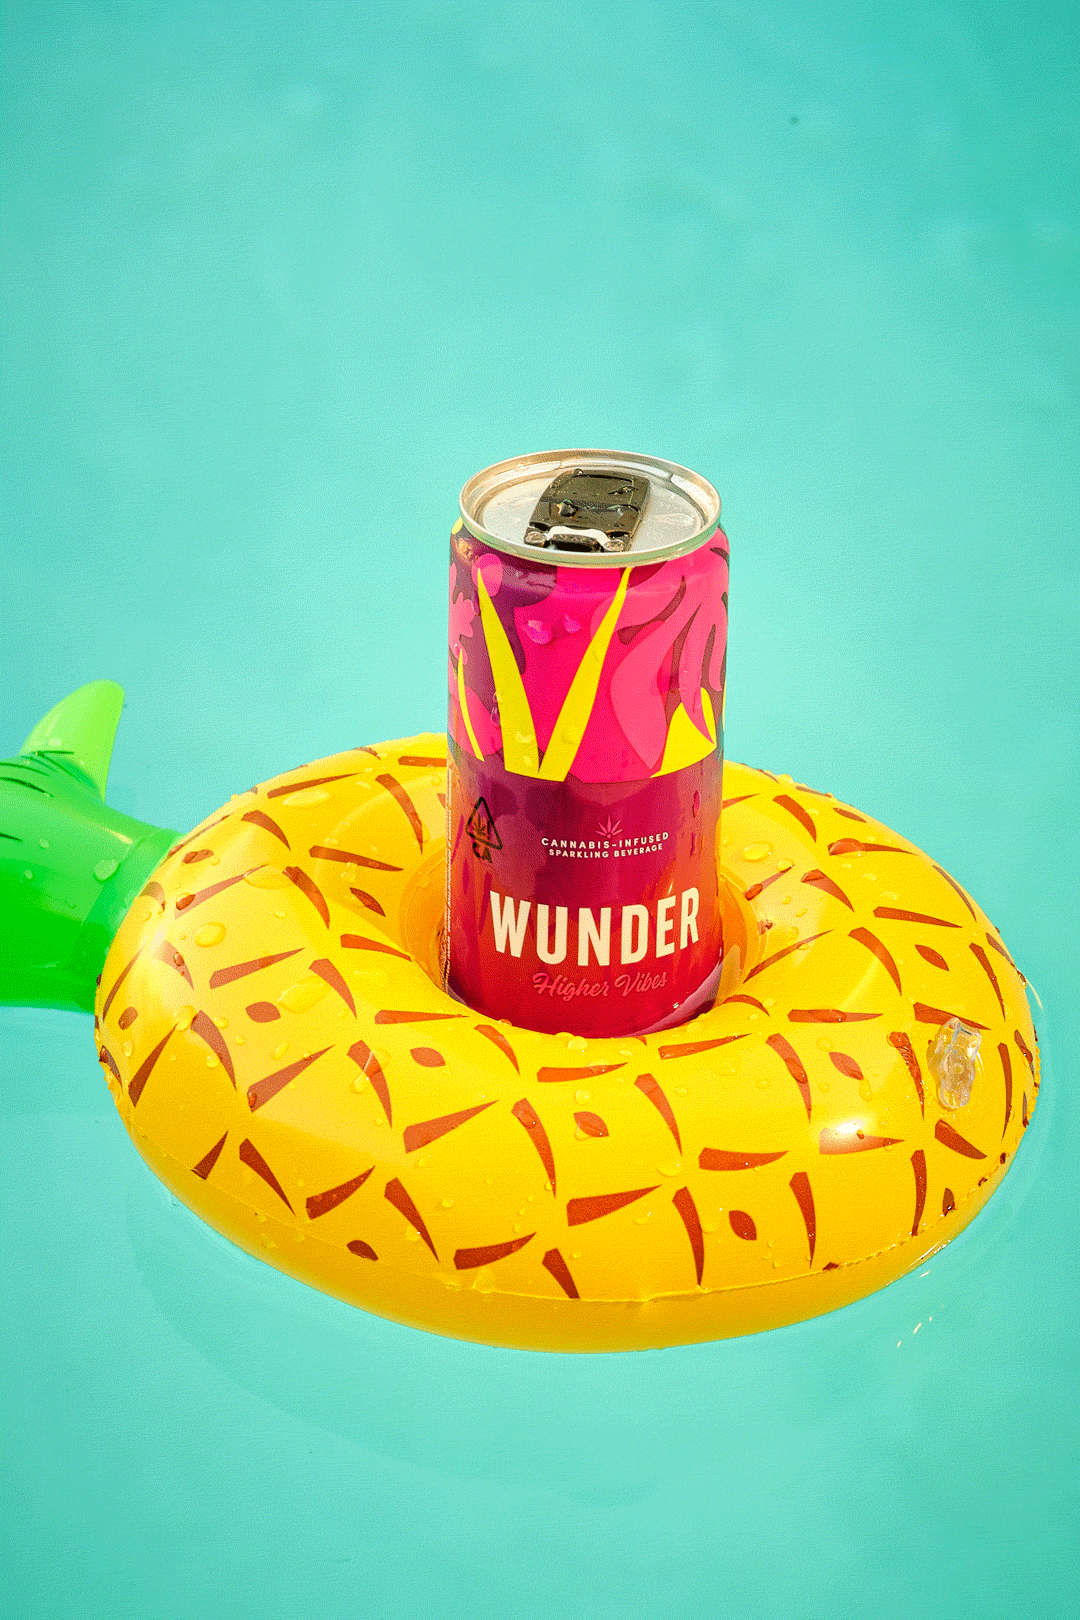 A beverage can floating in a pineapple-shaped pool float.